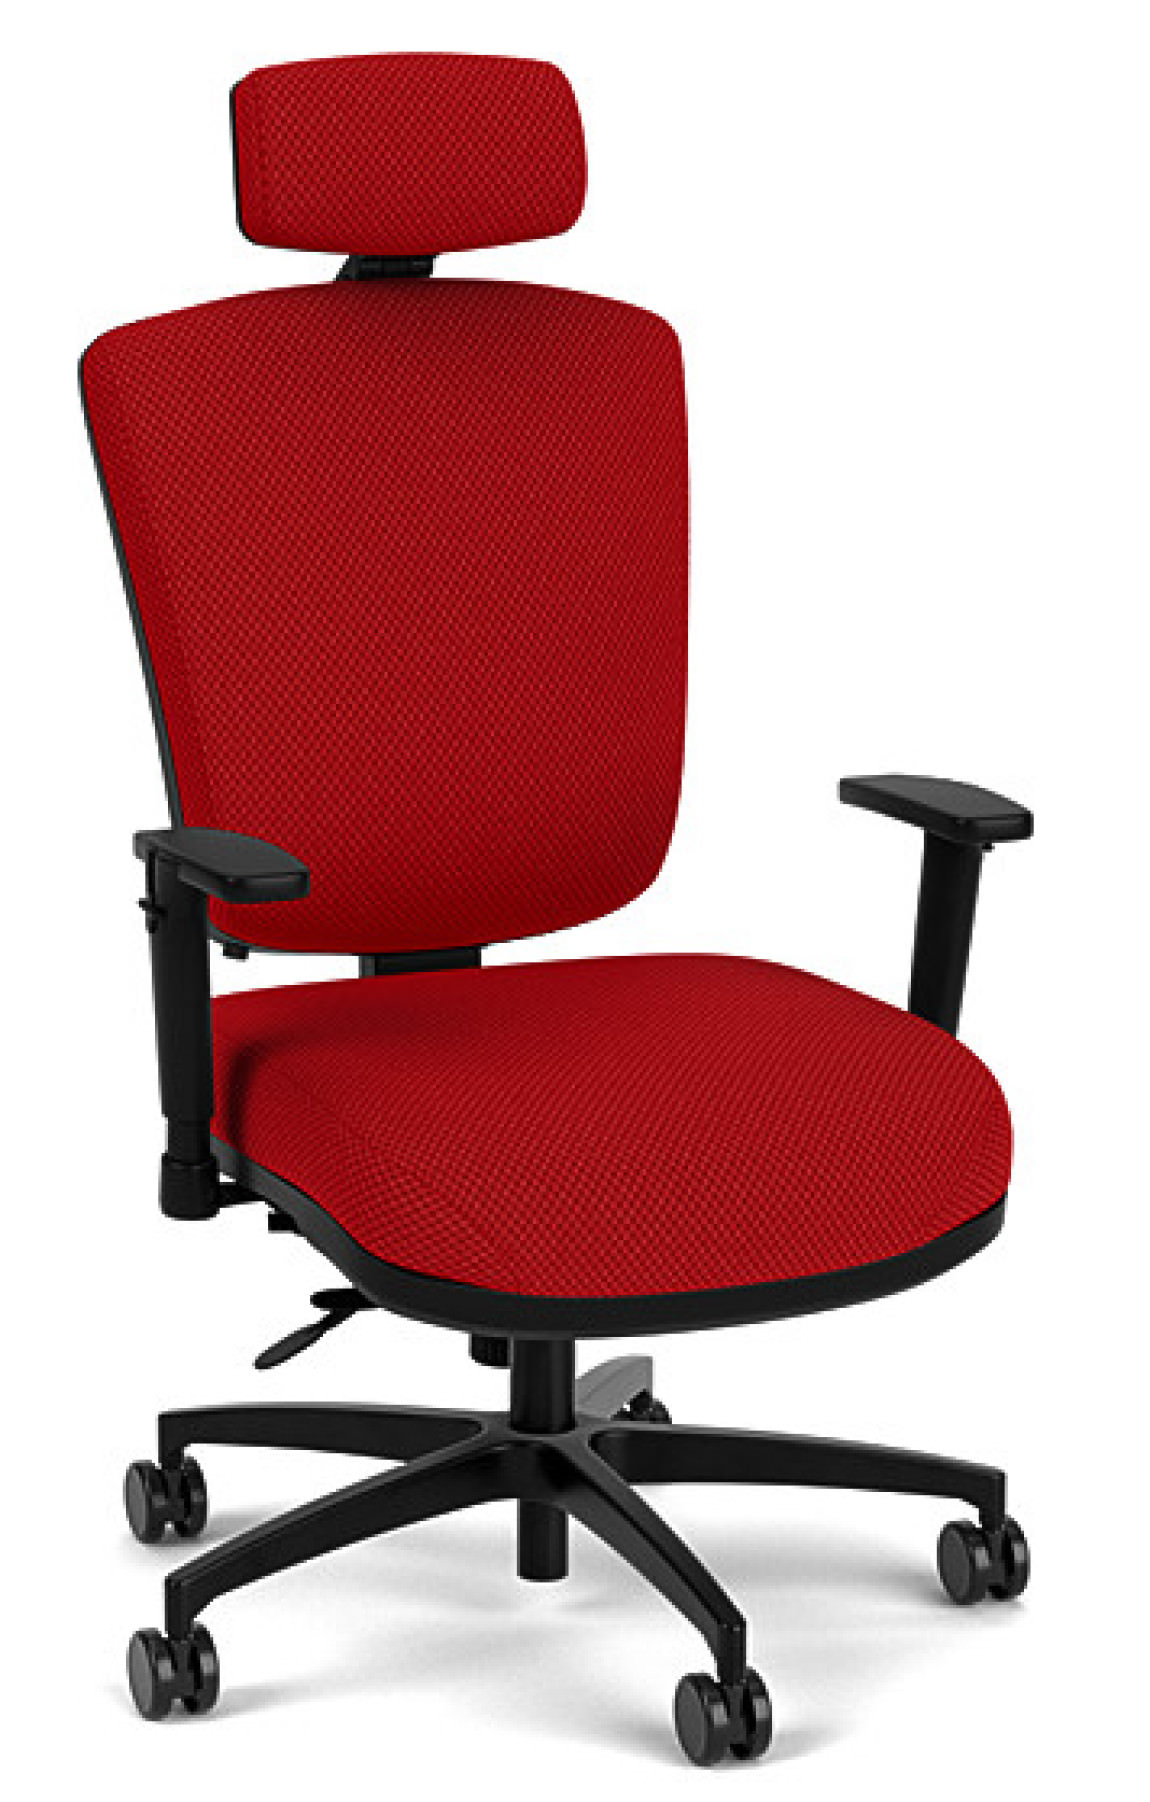 Ergonomic Chair with Lumbar Support and Headrest